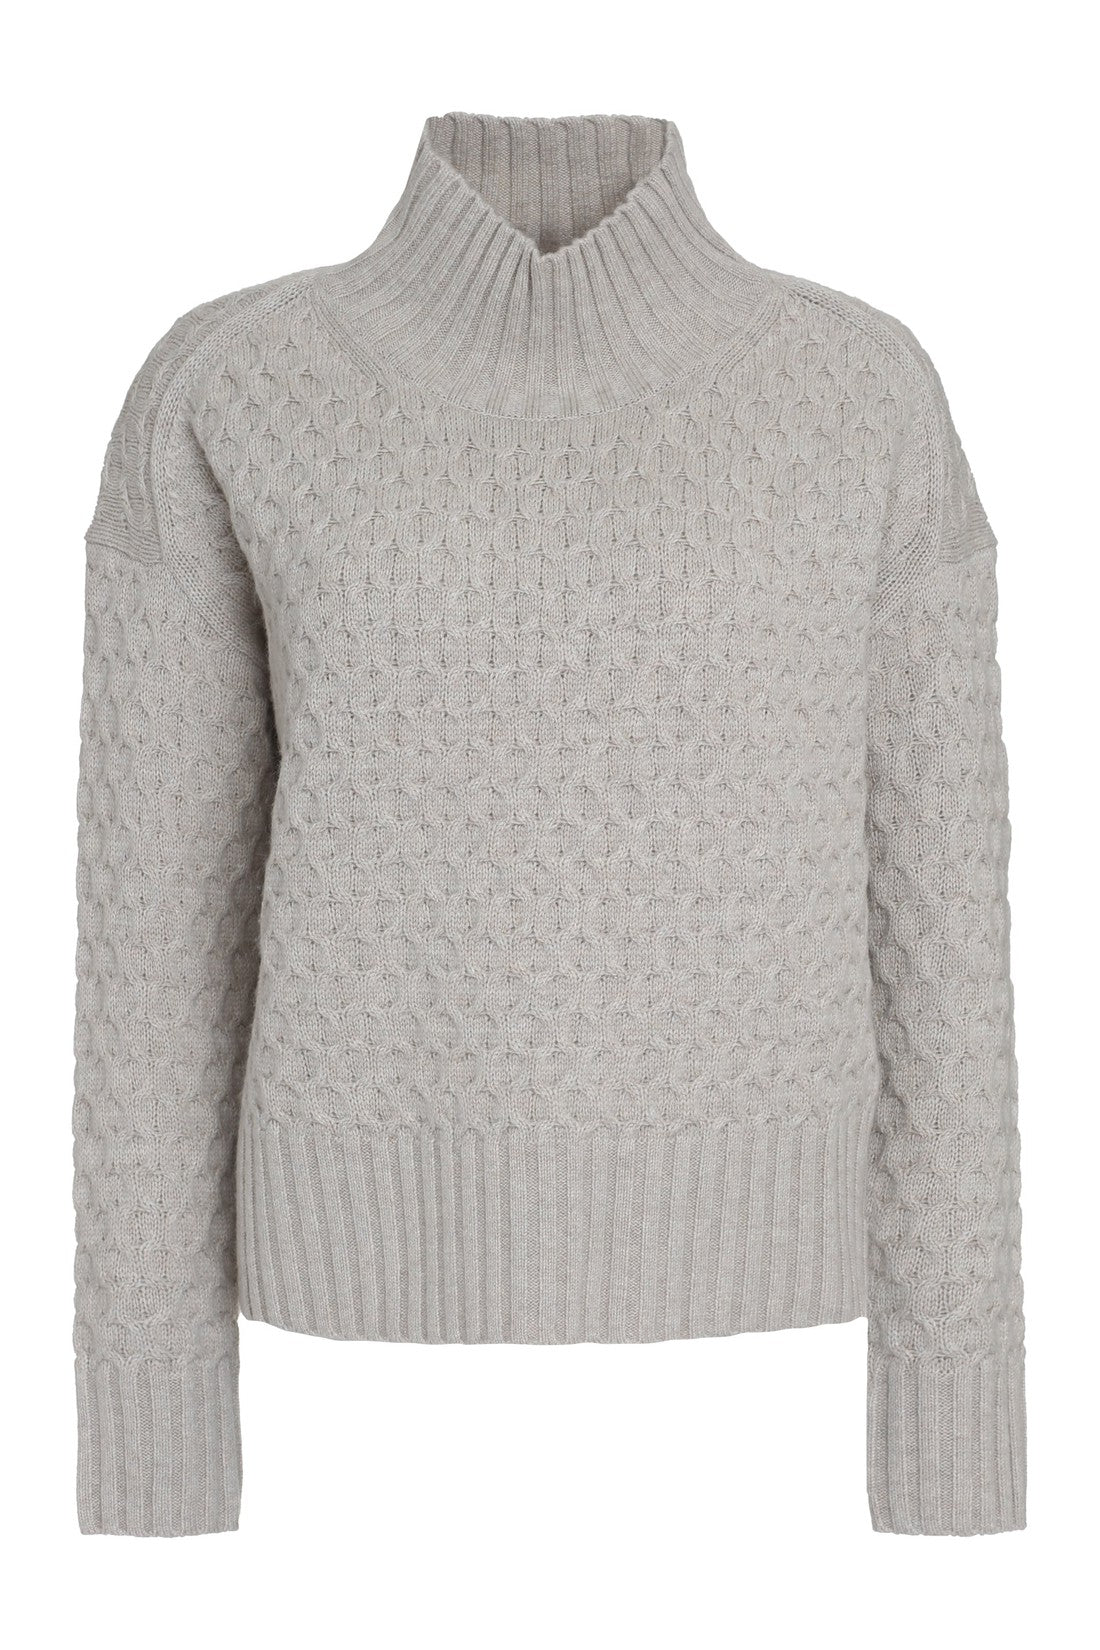 Max Mara Studio-OUTLET-SALE-Valdese wool and cashmere sweater-ARCHIVIST